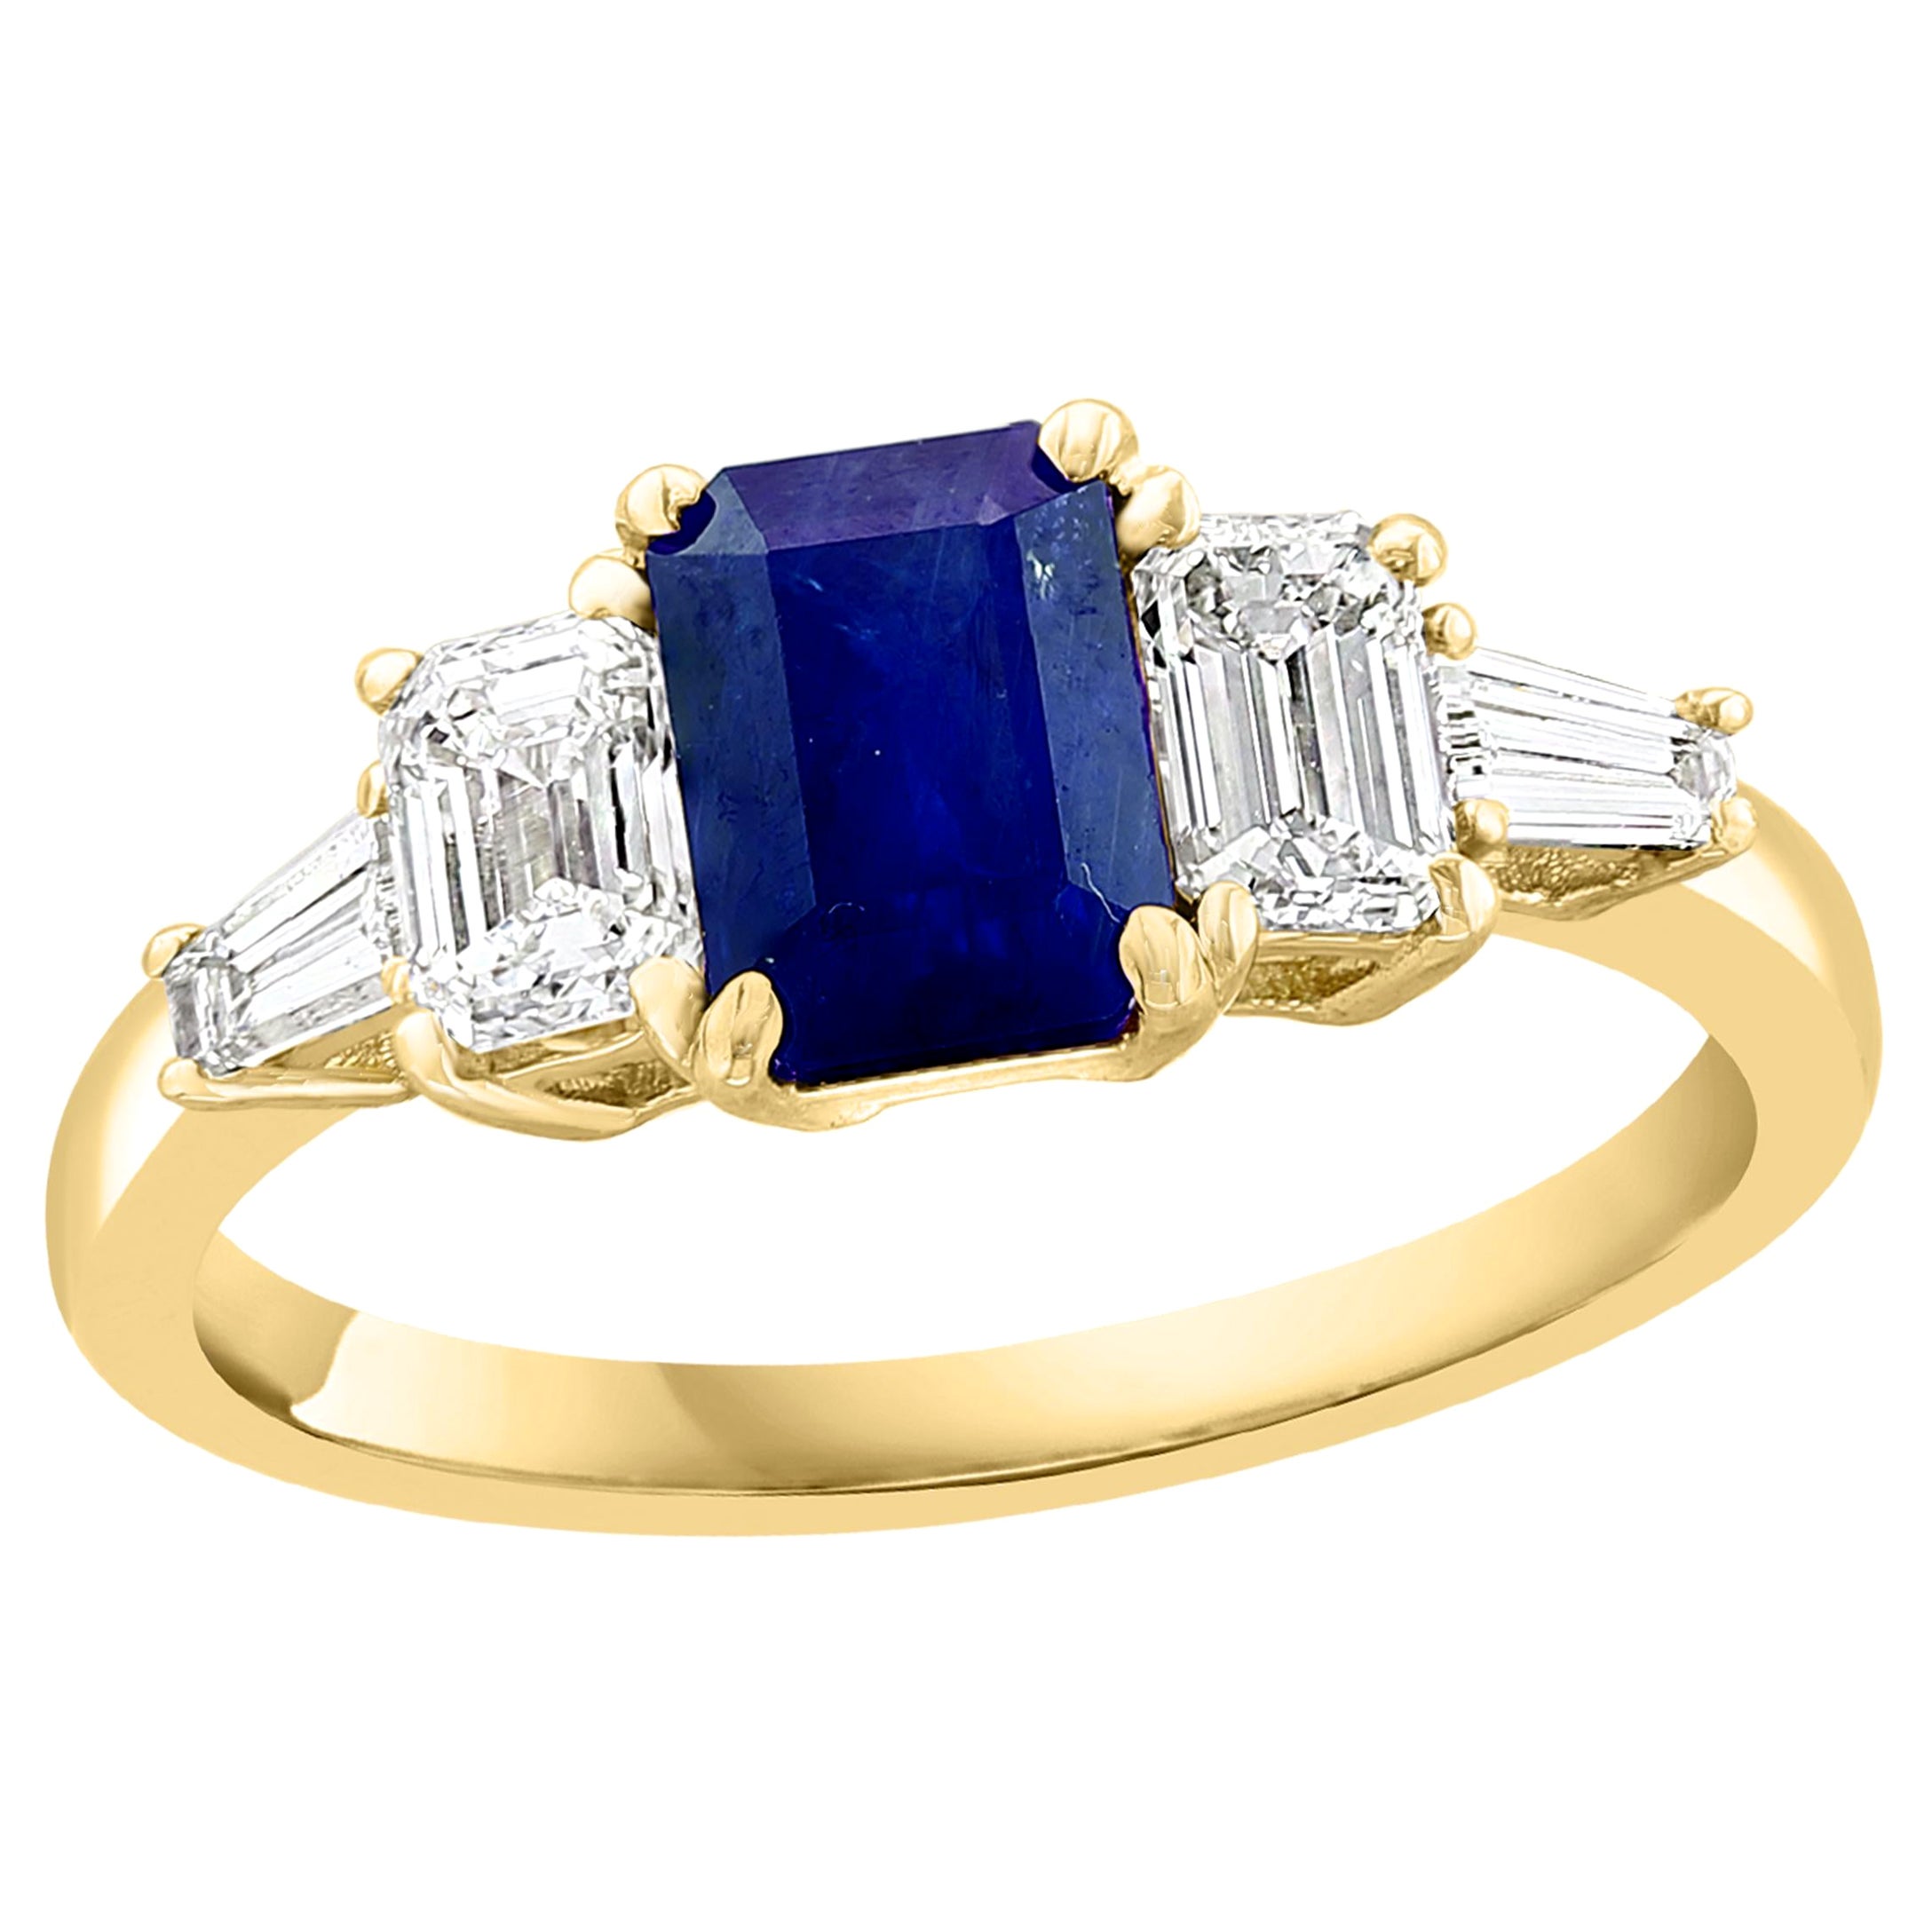 1.12 Carat Emerald Cut Blue Sapphire and Diamond 5 Stone Ring in 14K Yellow Gold